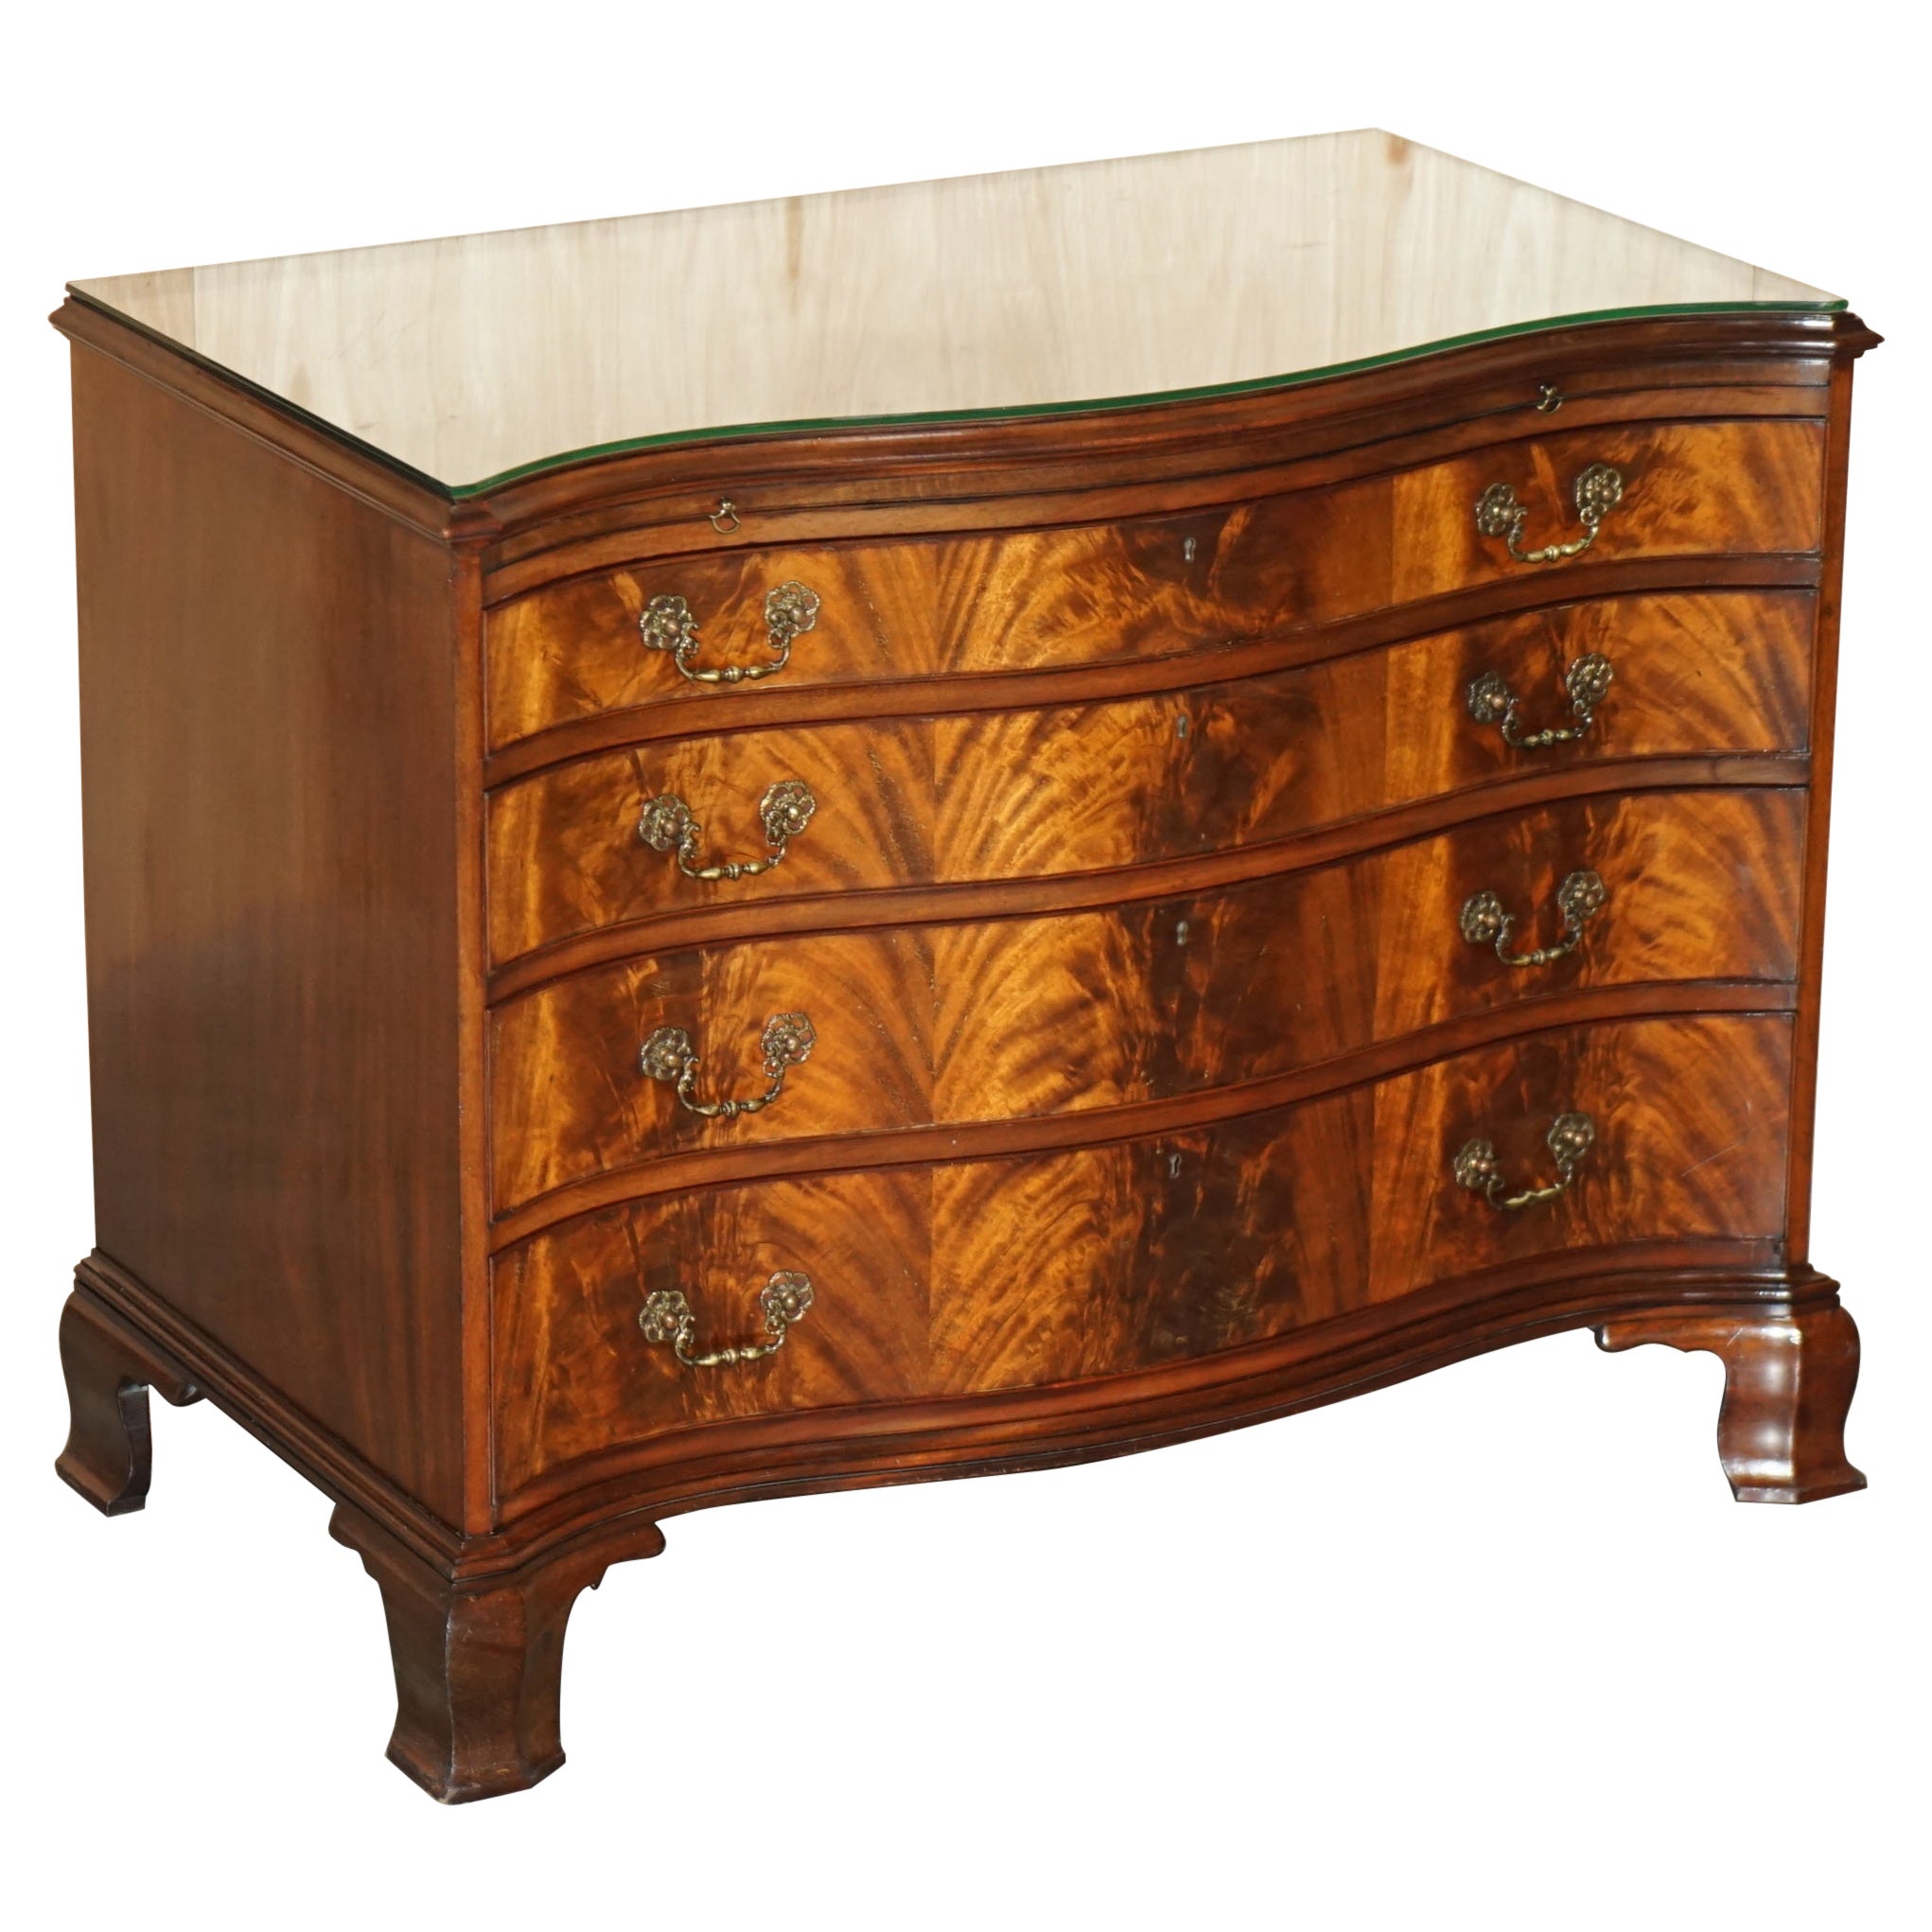 STUNNING FLAMED HARDWOOD HOWARD & SON'S SERPENTINE FRONTED CHEST OF DRAWERs For Sale